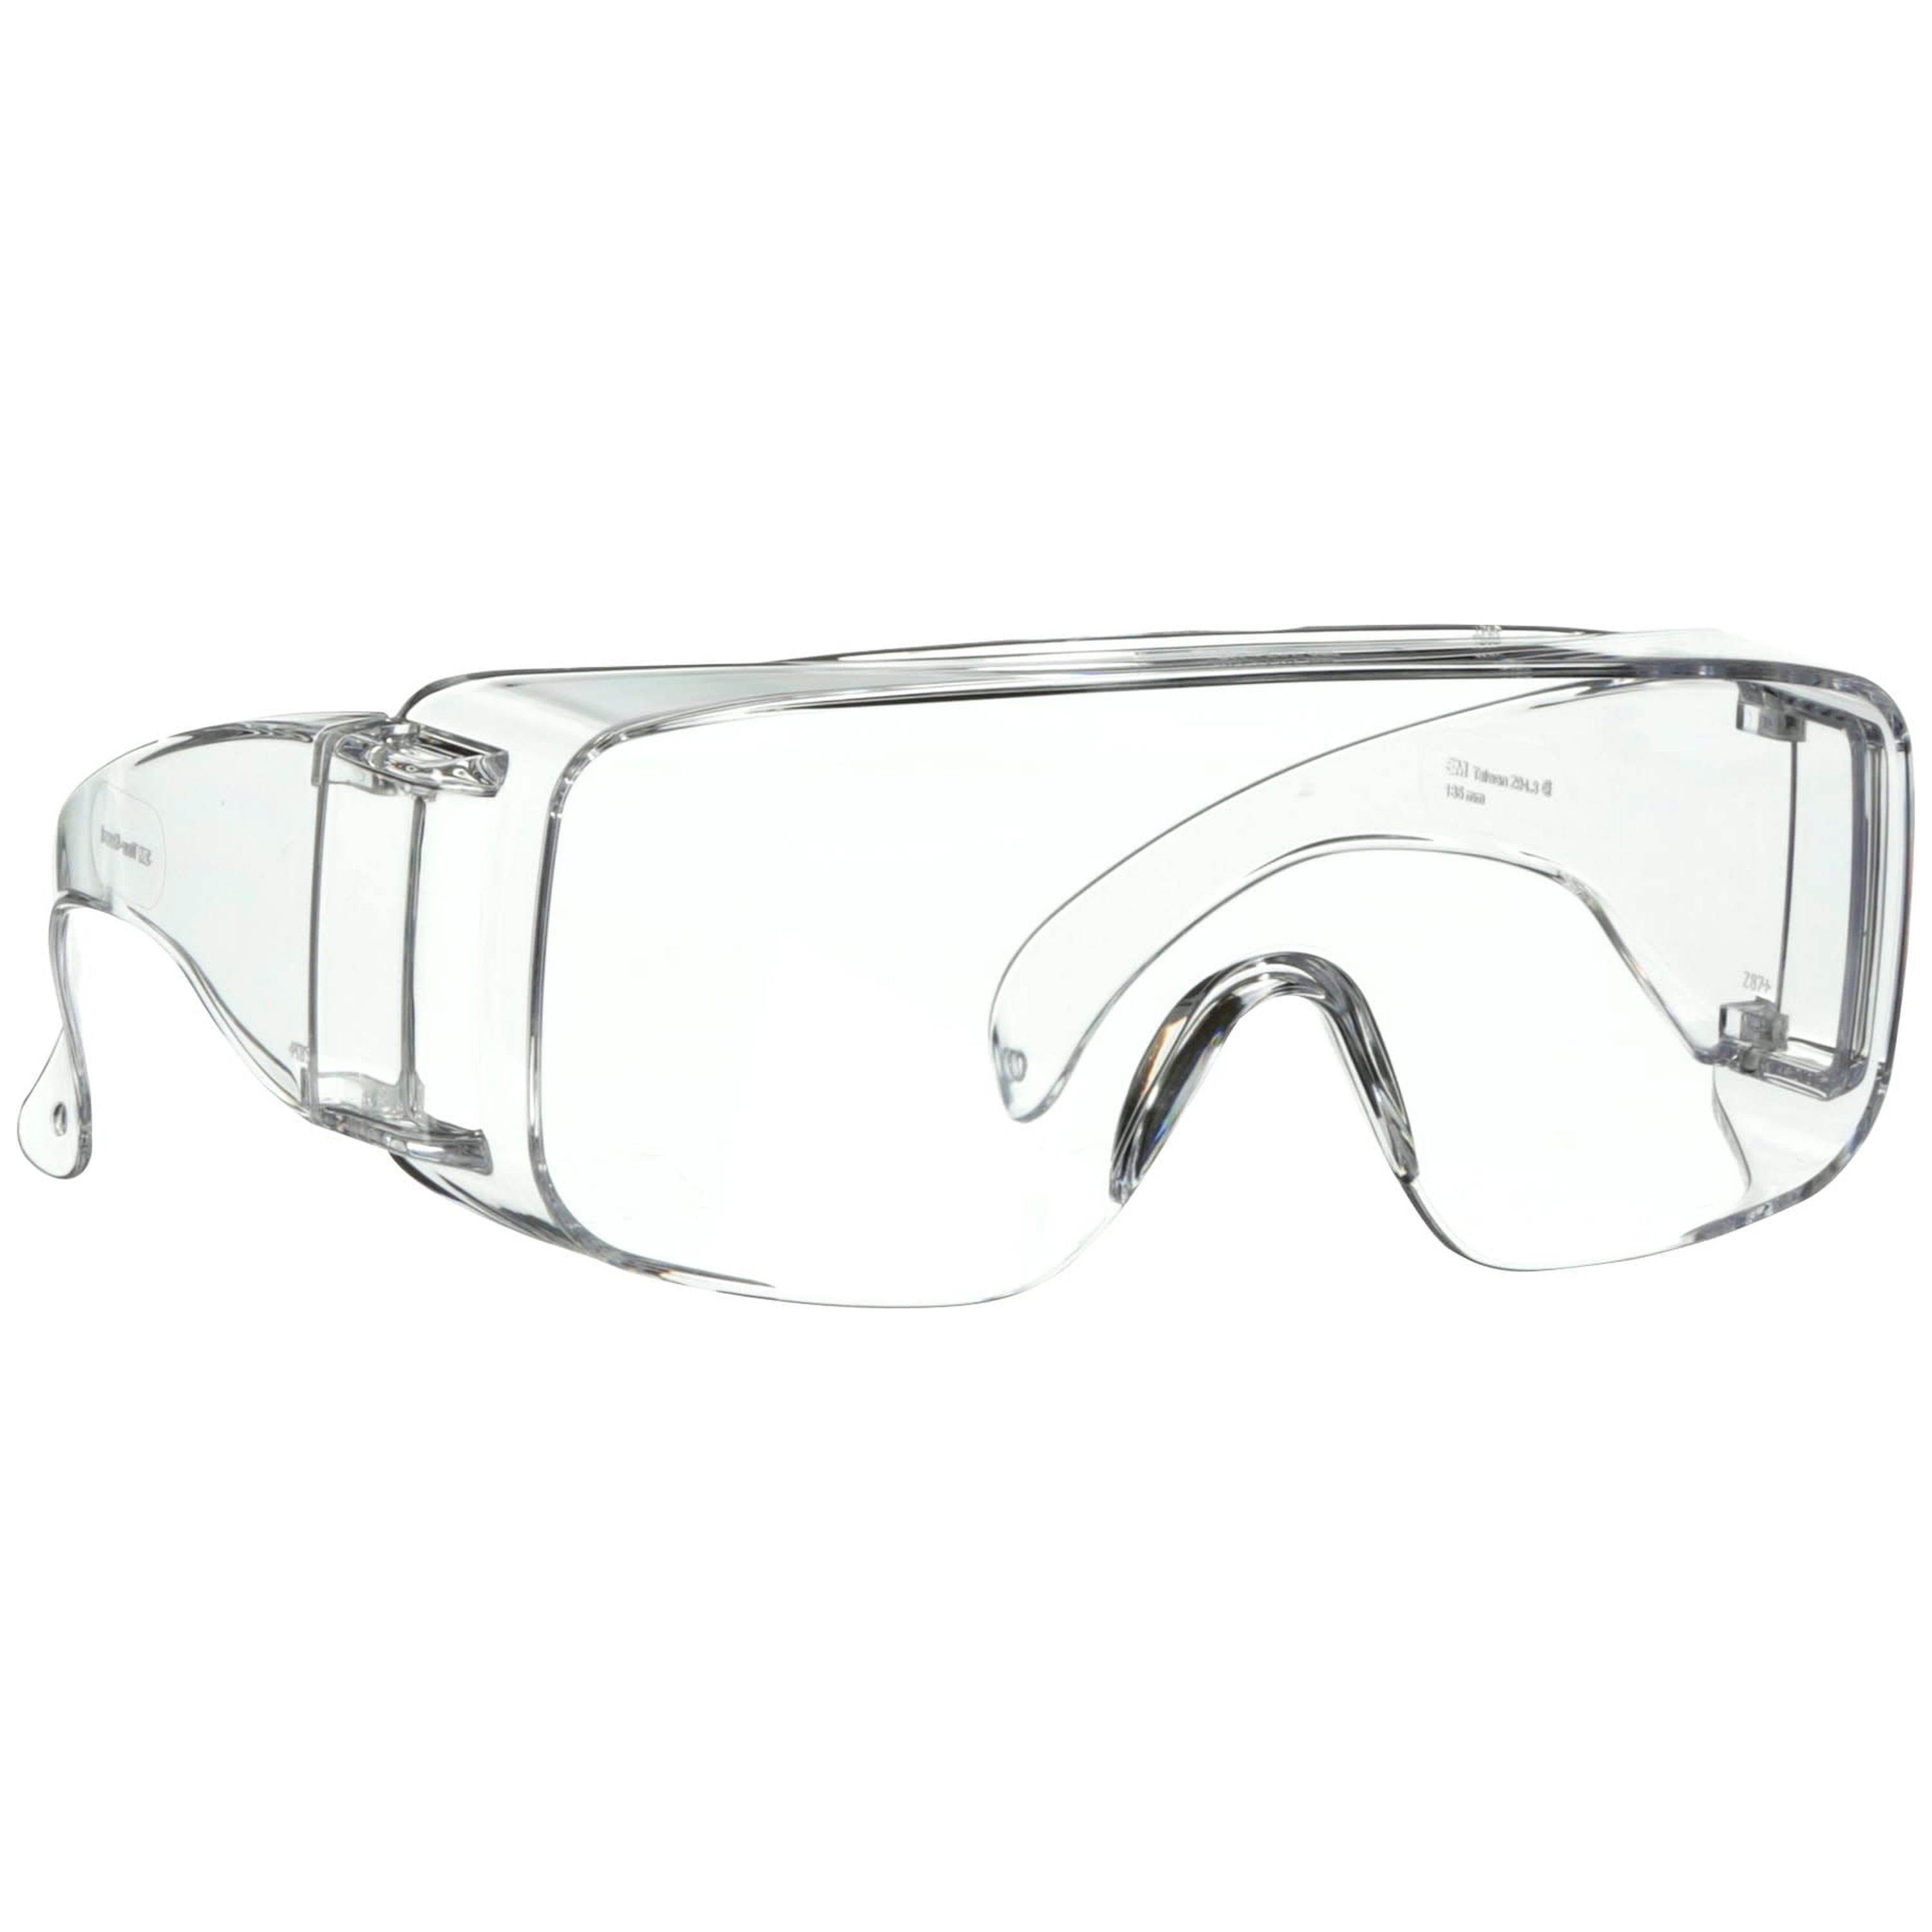 3M Over-the-Glass Clear Lens Eyewear Protection, Clear Frame - image 5 of 5